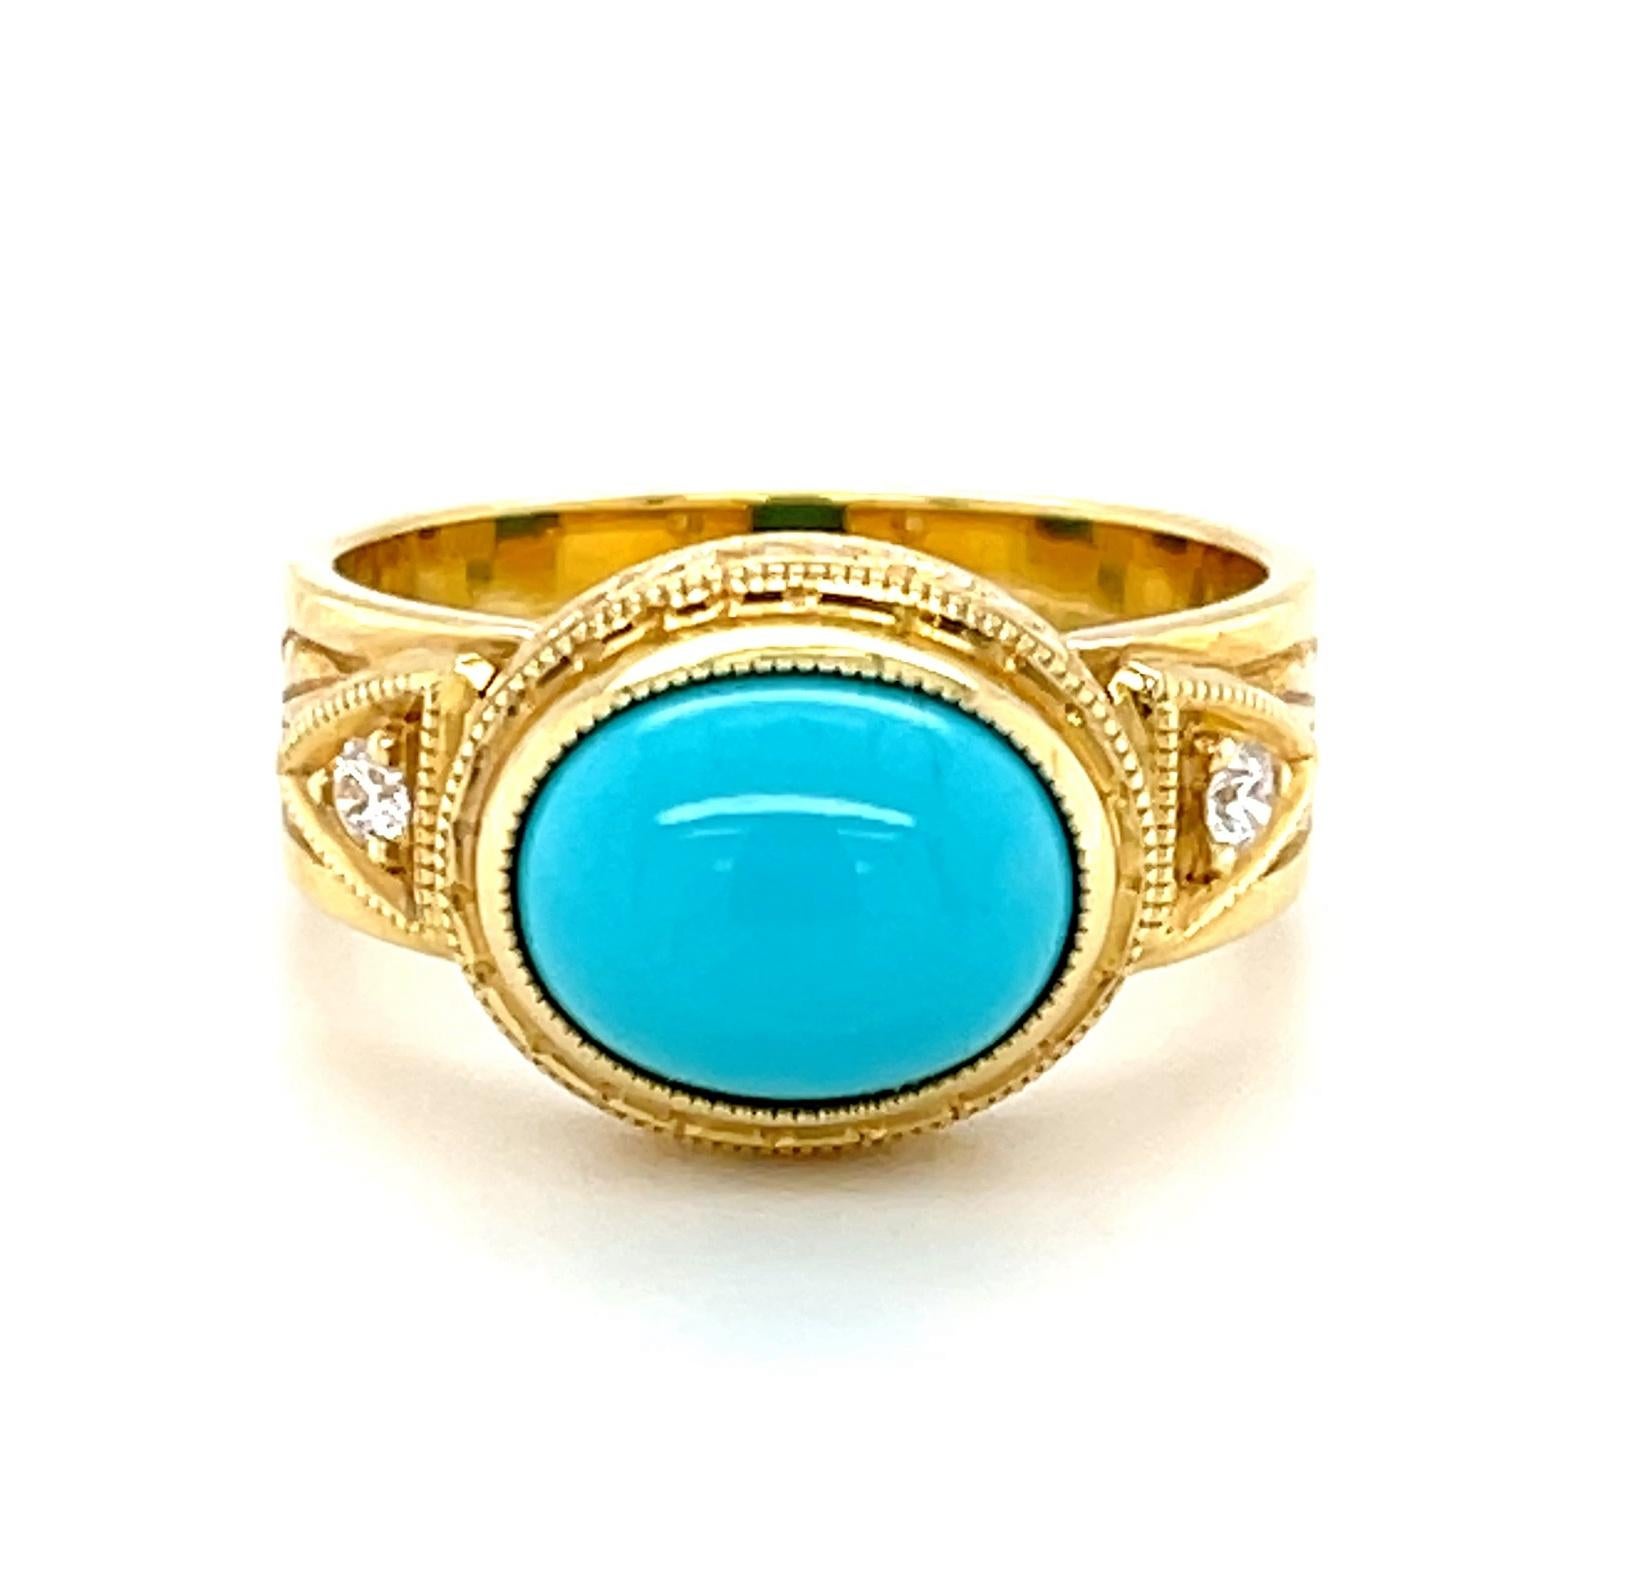 This handsome 18k yellow gold band ring features a gorgeous 2.13 carat oval turquoise cabochon from the famous Sleeping Beauty Mine! The Sleeping Beauty Mine in Arizona is one of the most important sources of fine turquoise in the world but has been